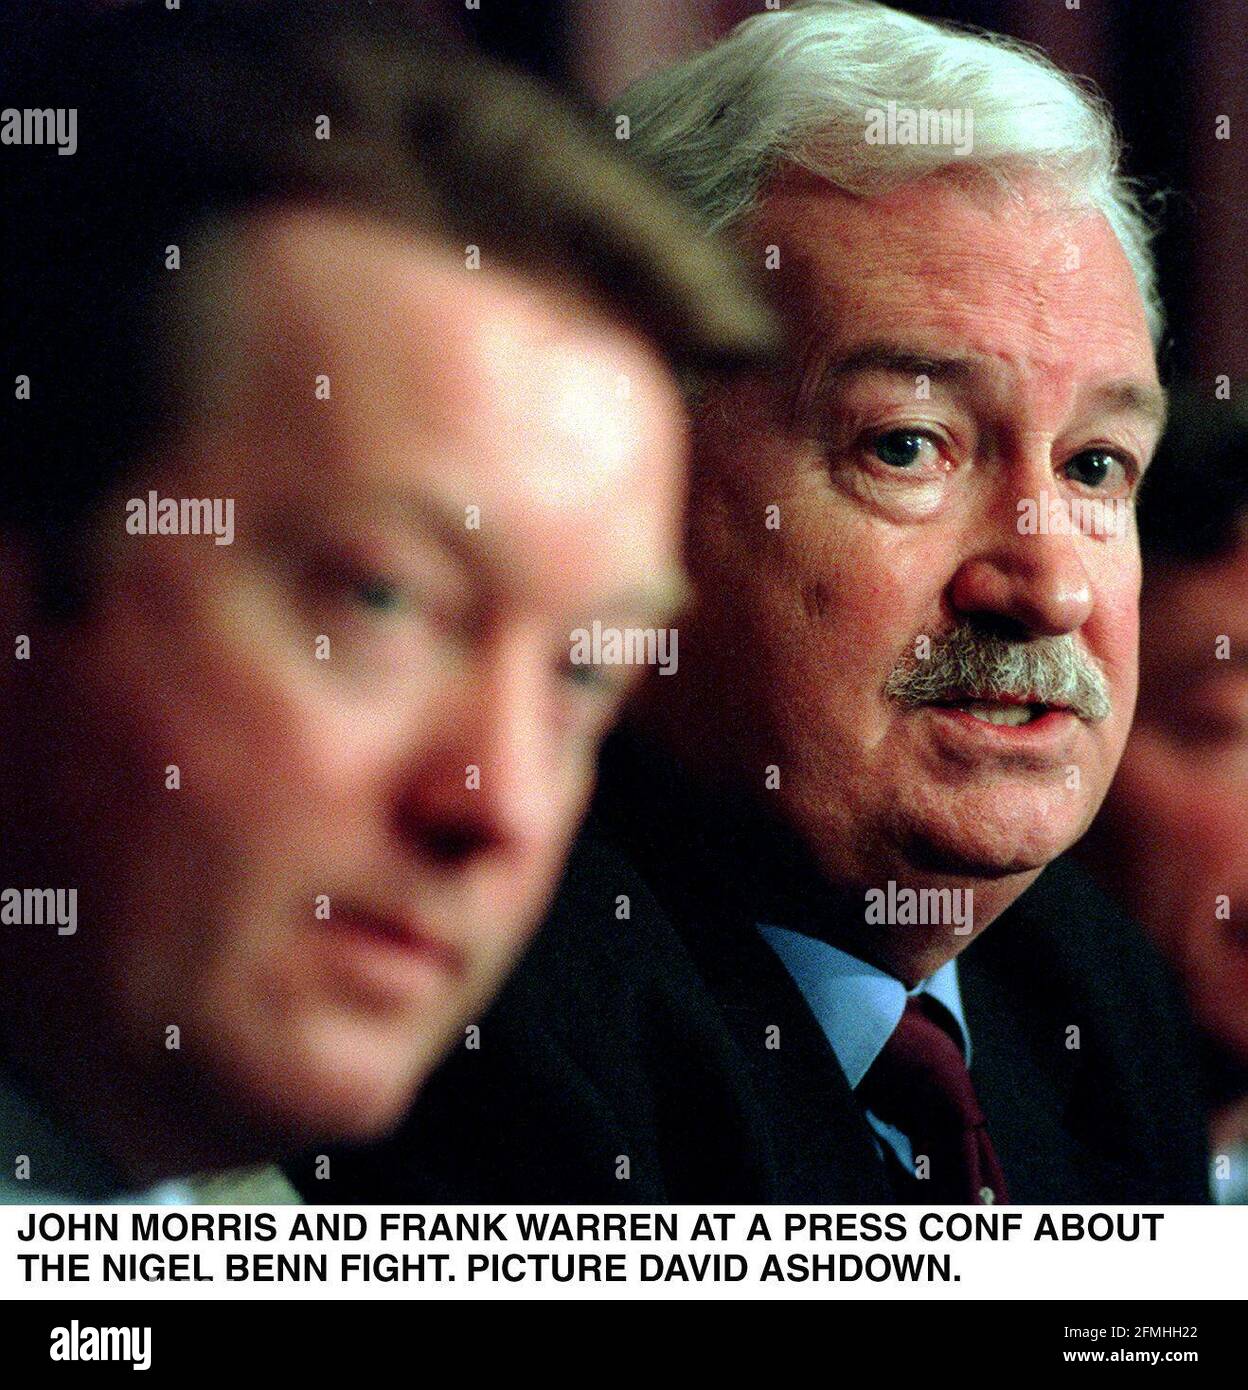 Frank Warren  Boxing promoter with John Morris from the British Board of Control at press conference discussing the dangers of boxing after  Gerald  McClellan had to have a blood clot removed after his fight with Nigel Benn Stock Photo